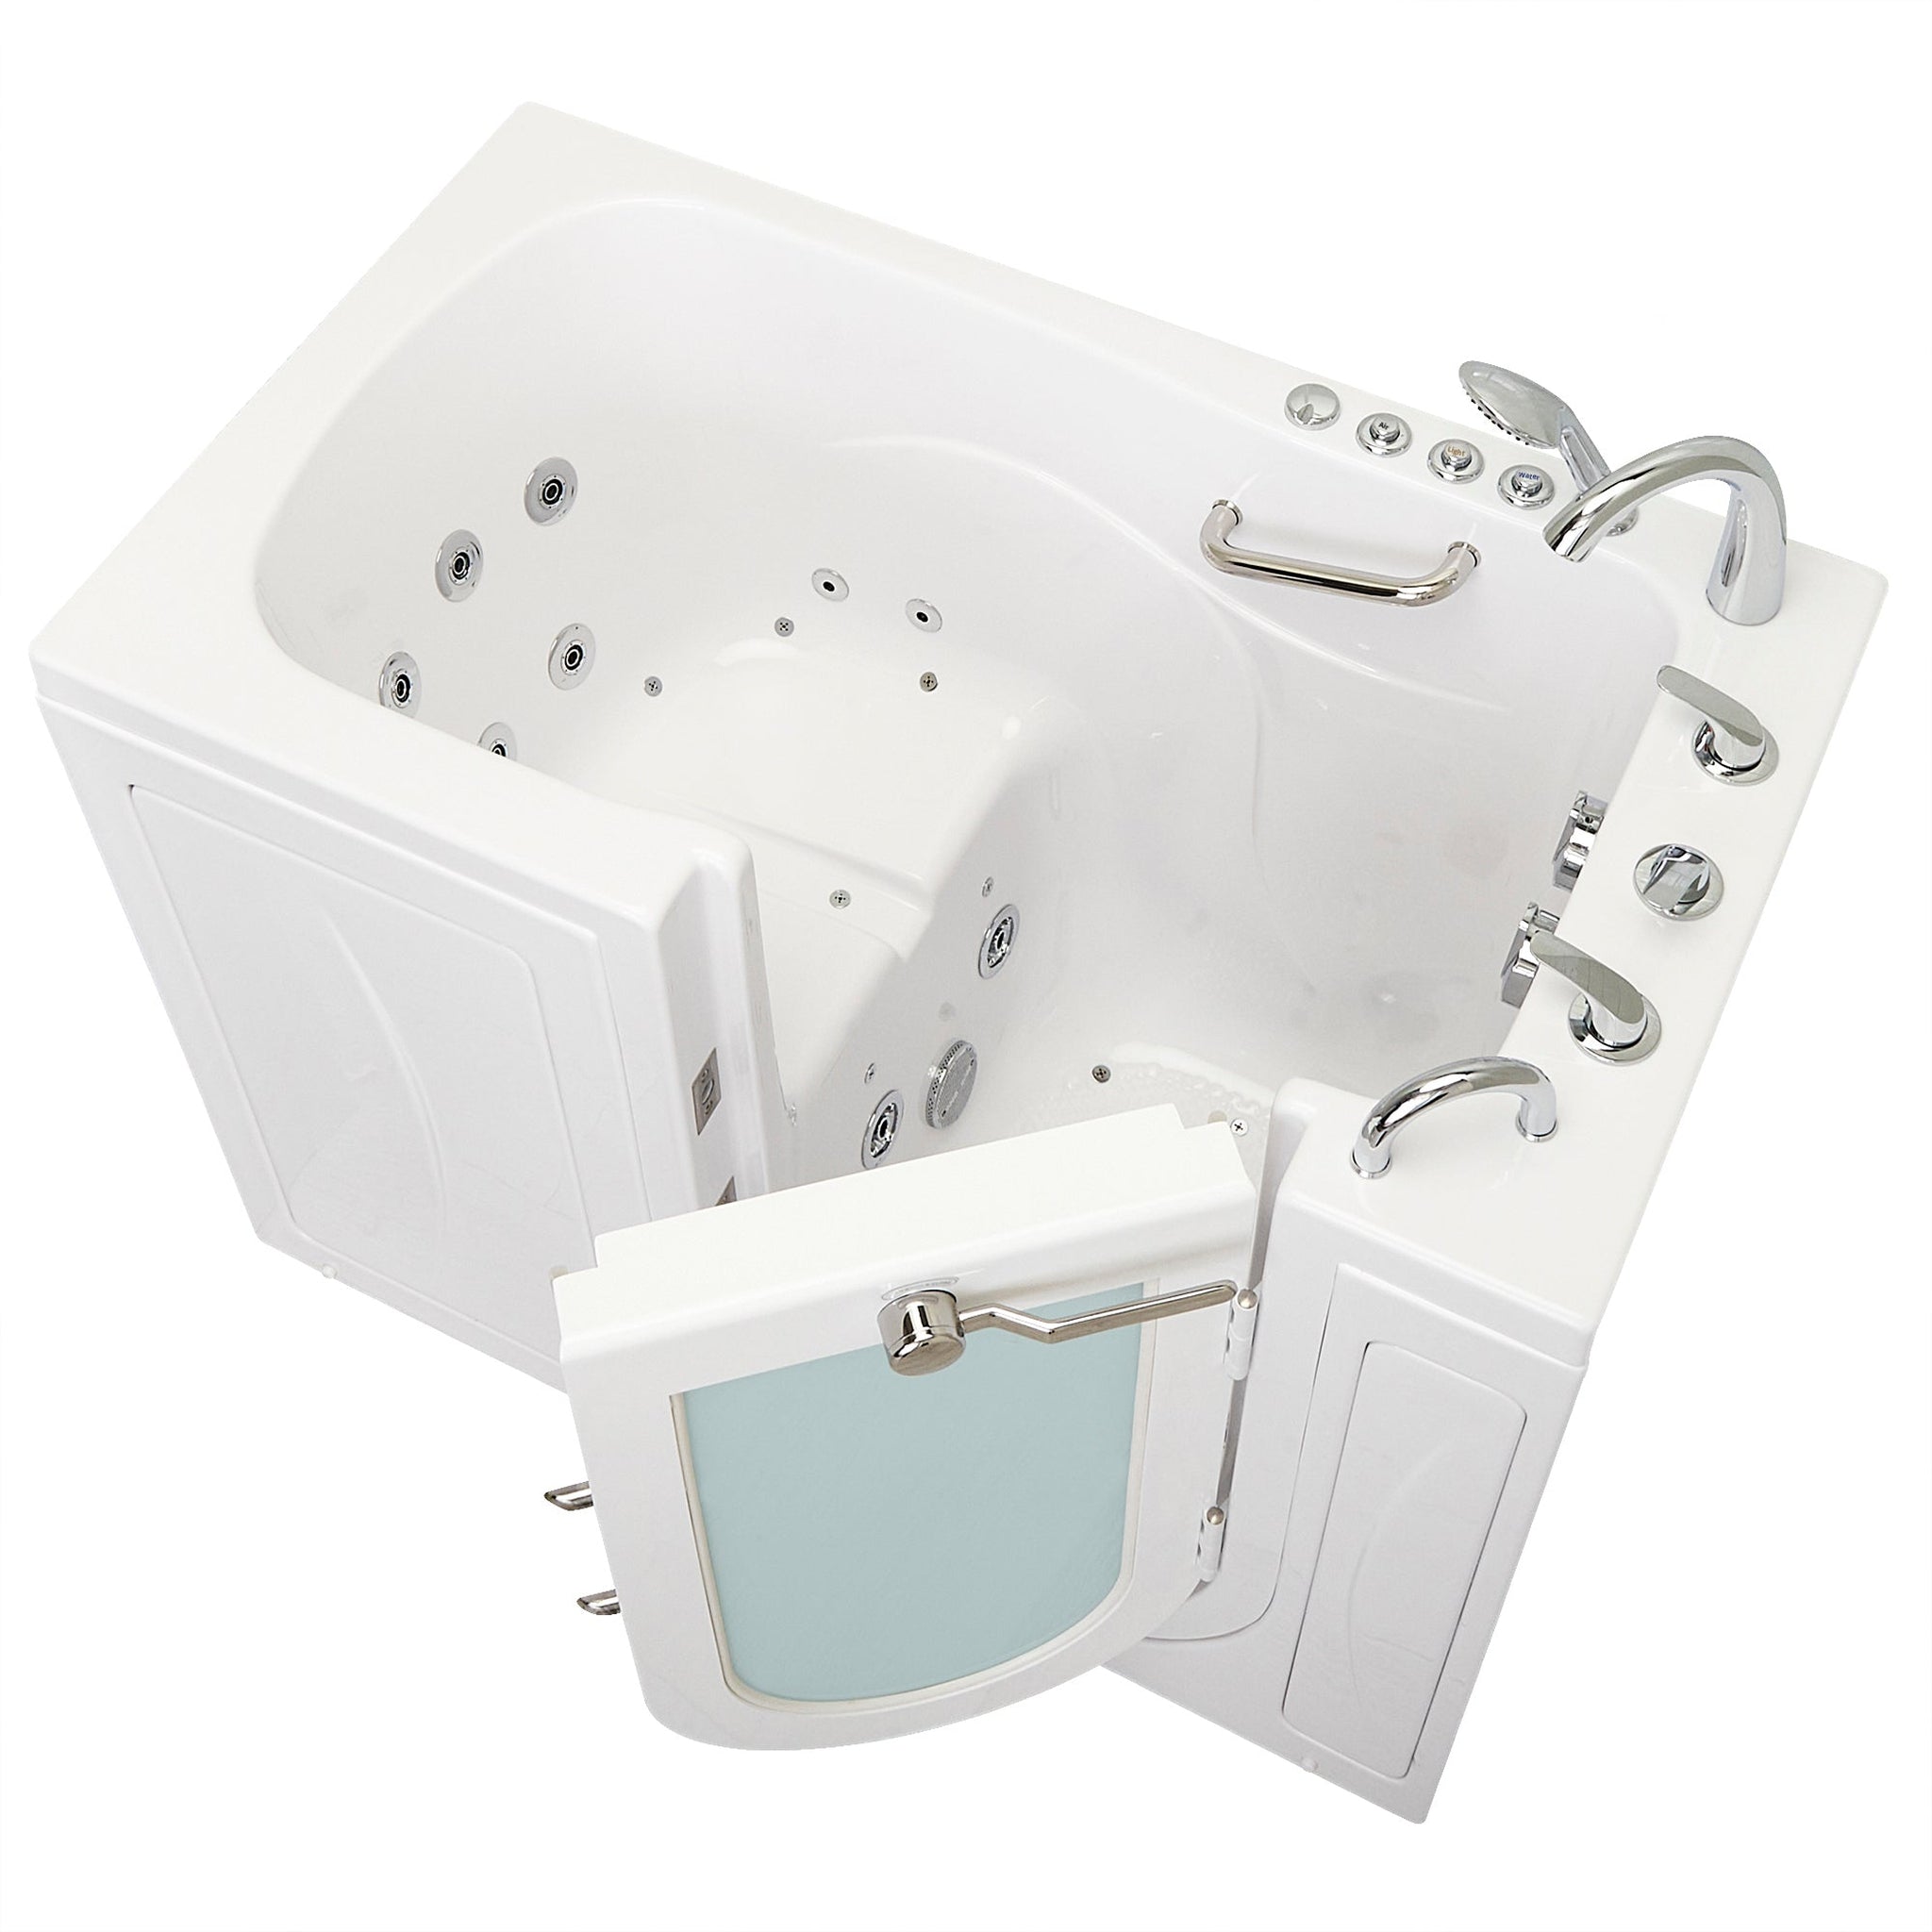 http://usbathstore.com/cdn/shop/products/Ellas-Bubbles-Monaco-32-x-52-White-Acrylic-Air-and-Hydro-Massage-Walk-In-Bathtub-With-5-Piece-Fast-Fill-Faucet-2-Dual-Drain-and-Left-Outward-Swing-Door.jpg?v=1682243110